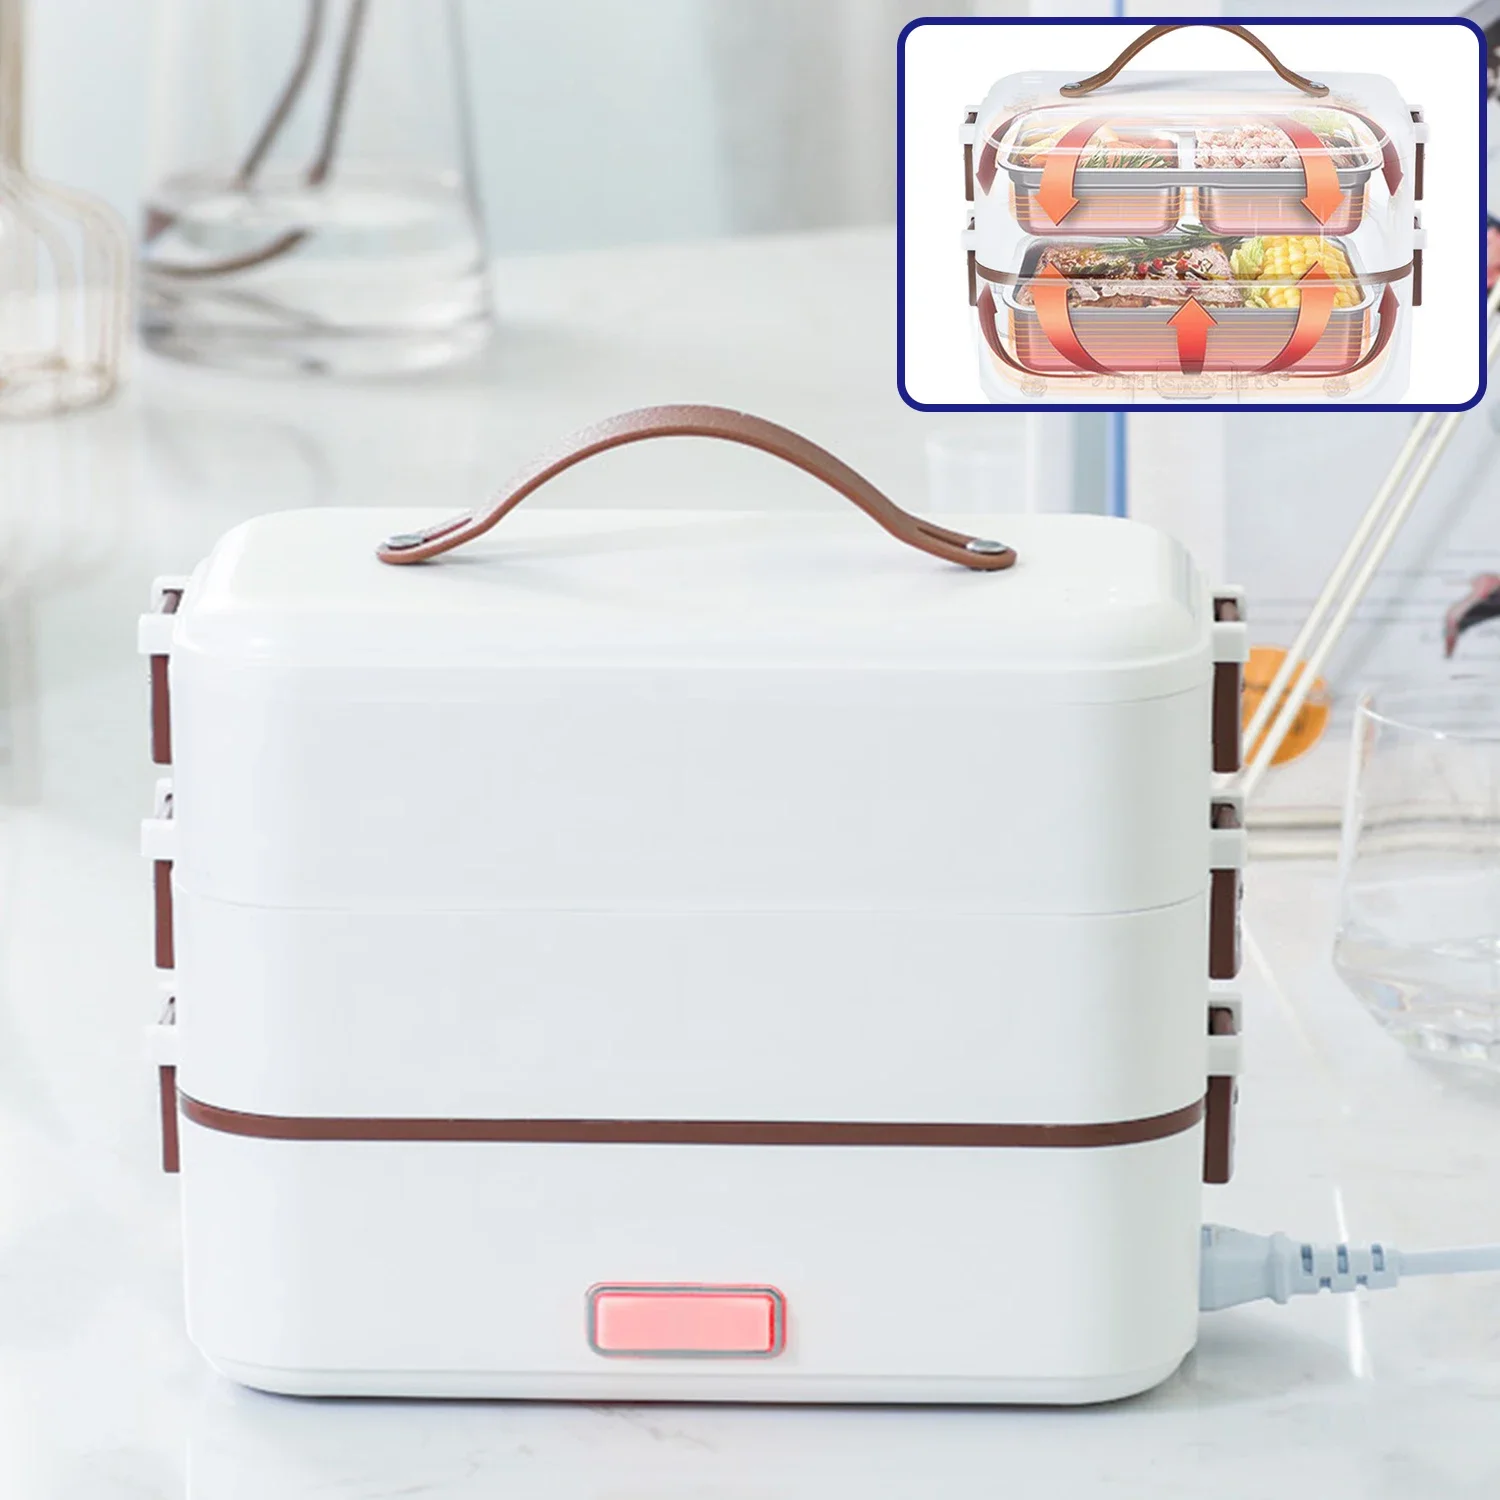 

Electric Lunch Boxes,Heated Thermal Lunch Box,Multilayer Layer Portable Food Warmer LunchBox for Car,Truck,Office Worker,Student